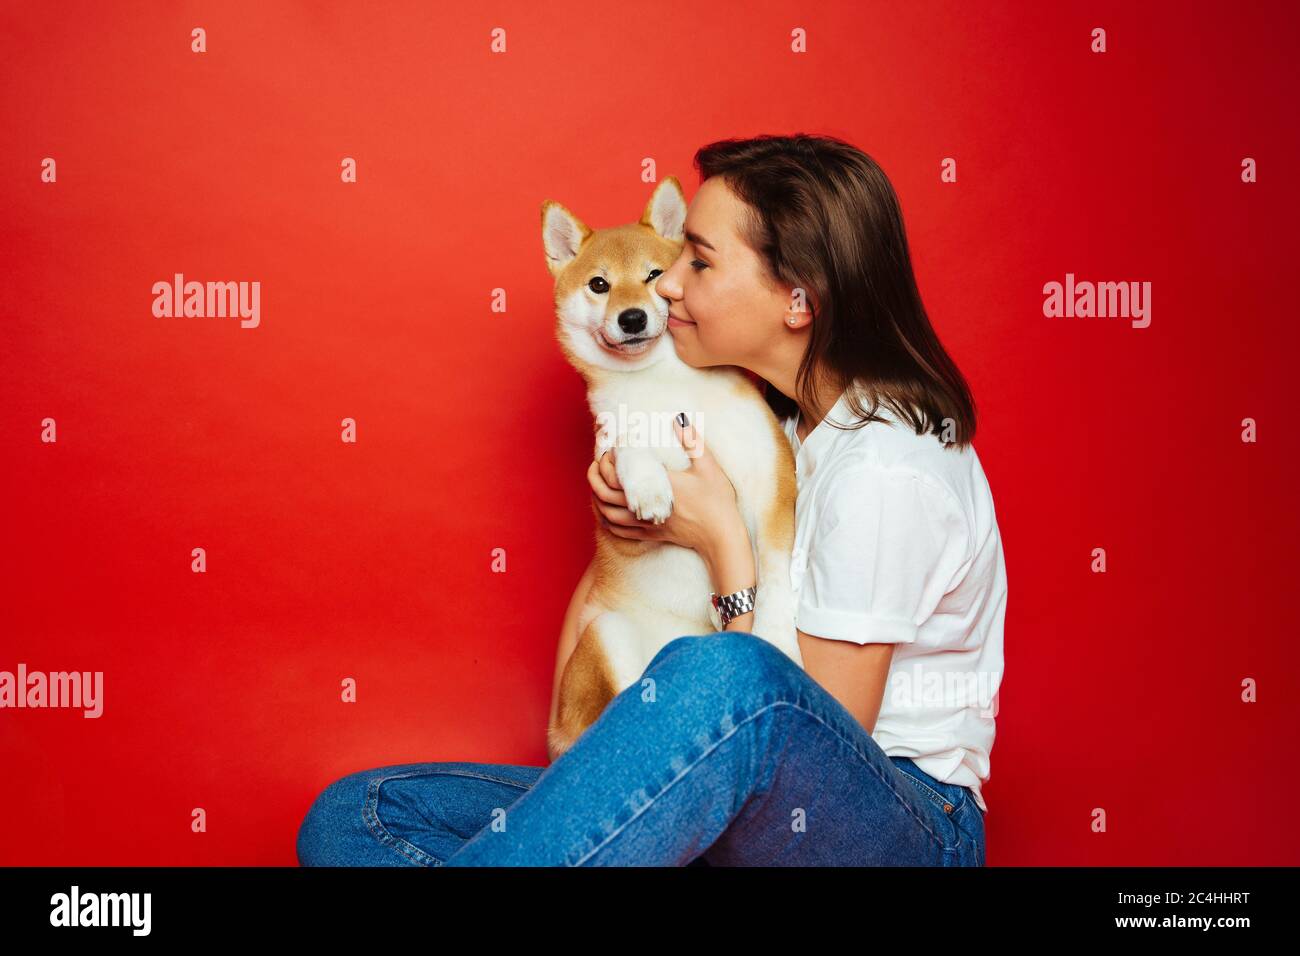 Cute brunette woman in white t shirt and jeans holding and embracing Shiba Inu dog on plane red background. Love to the animals, pets concept Stock Photo